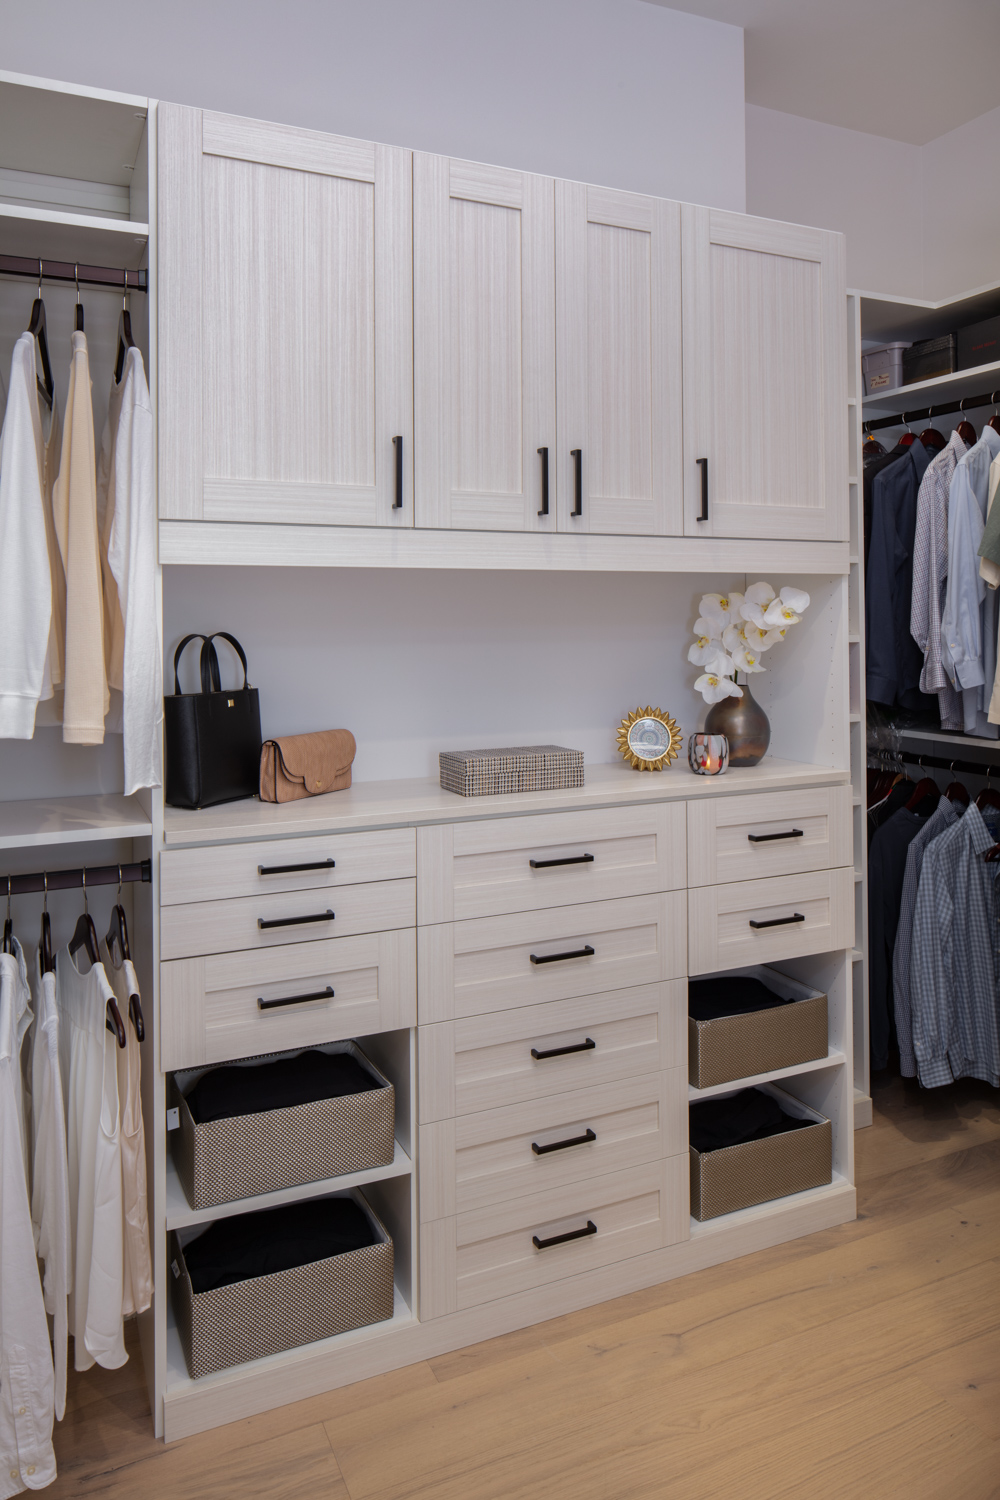 More Space Place custom-closet designers have specific training and experience to design solutions for your space, and they are familiar with what accessories are available to improve function. Iron away storage, wardrobe lifts, hampers, islands and benches are all functional additions to a custom closet. Talk with our closet designers today to learn more about our process.